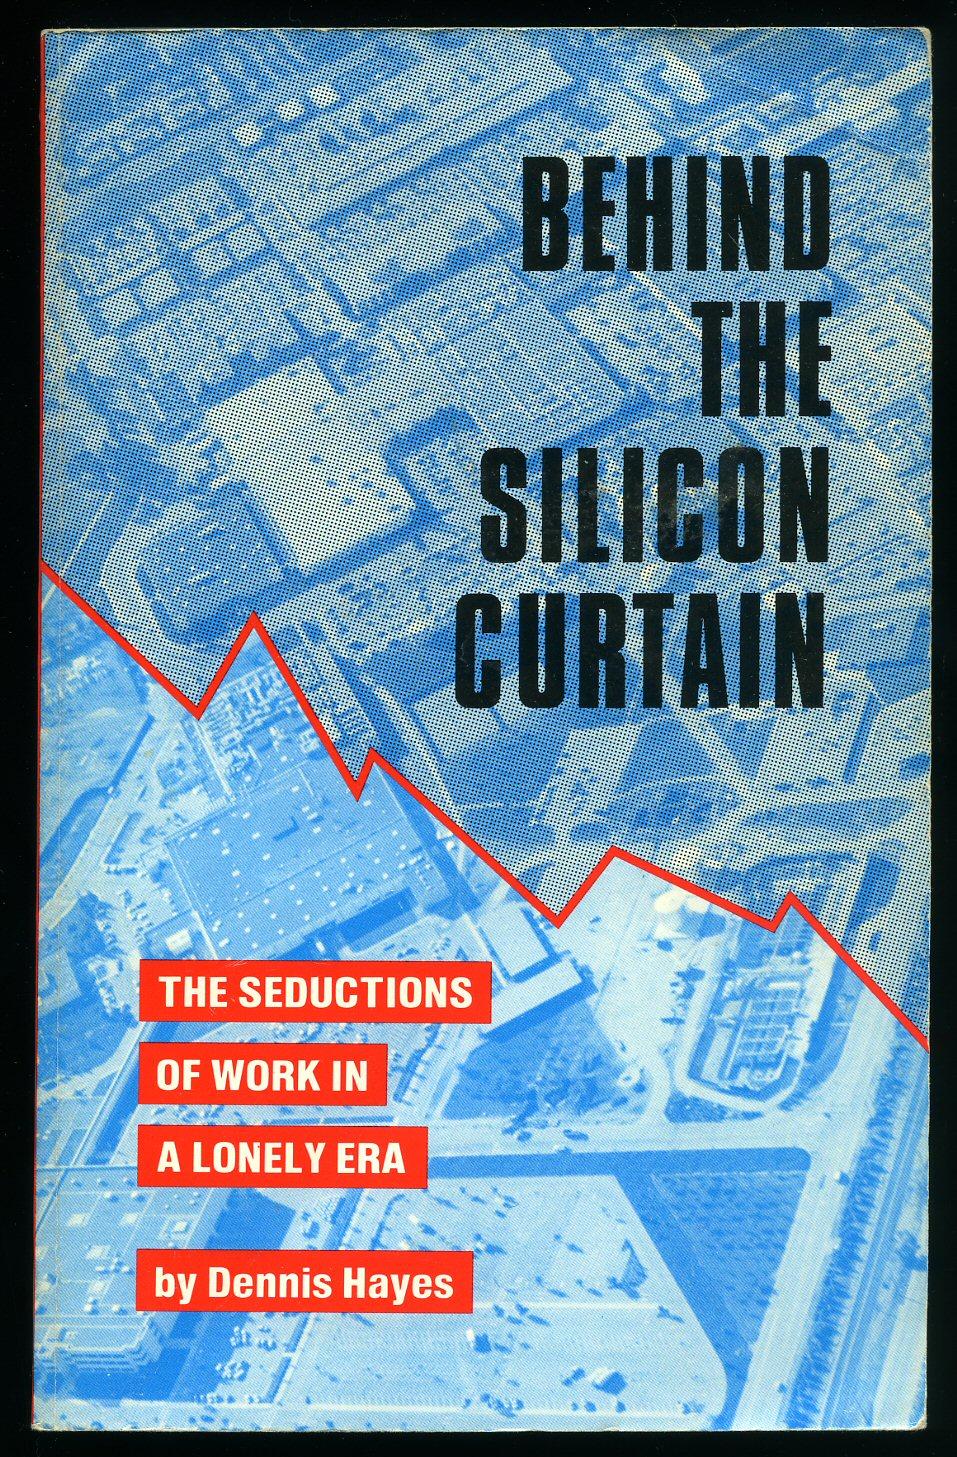 Behind the Silicon Curtain: The Seductions of Work in a Lonely Era